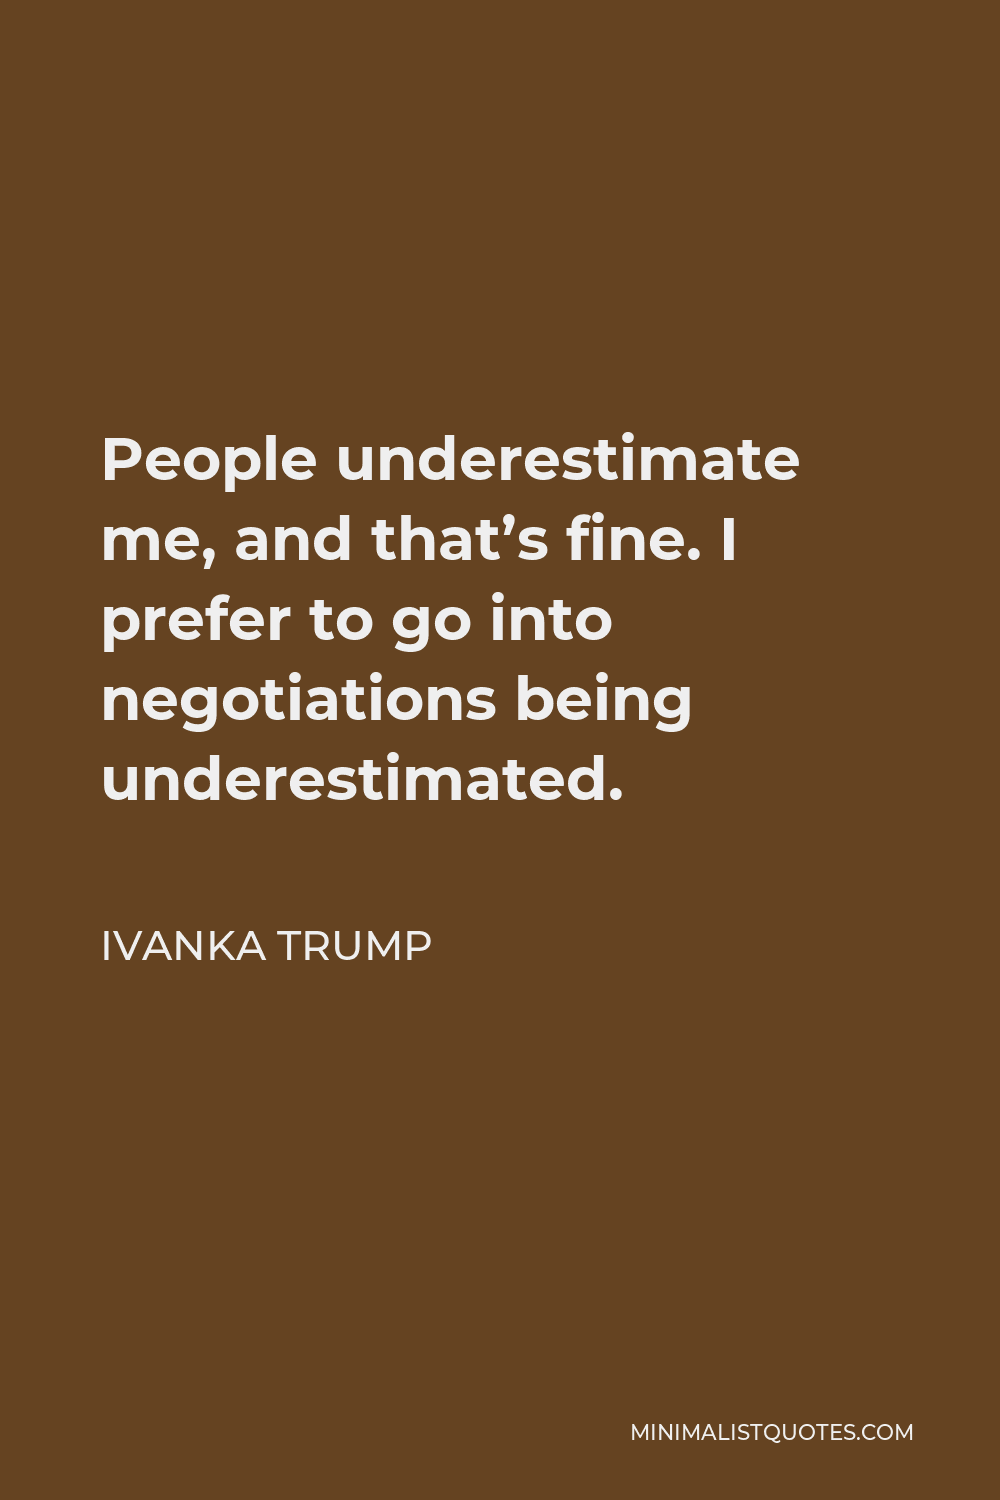 Ivanka Trump Quote - People underestimate me, and that’s fine. I prefer to go into negotiations being underestimated.